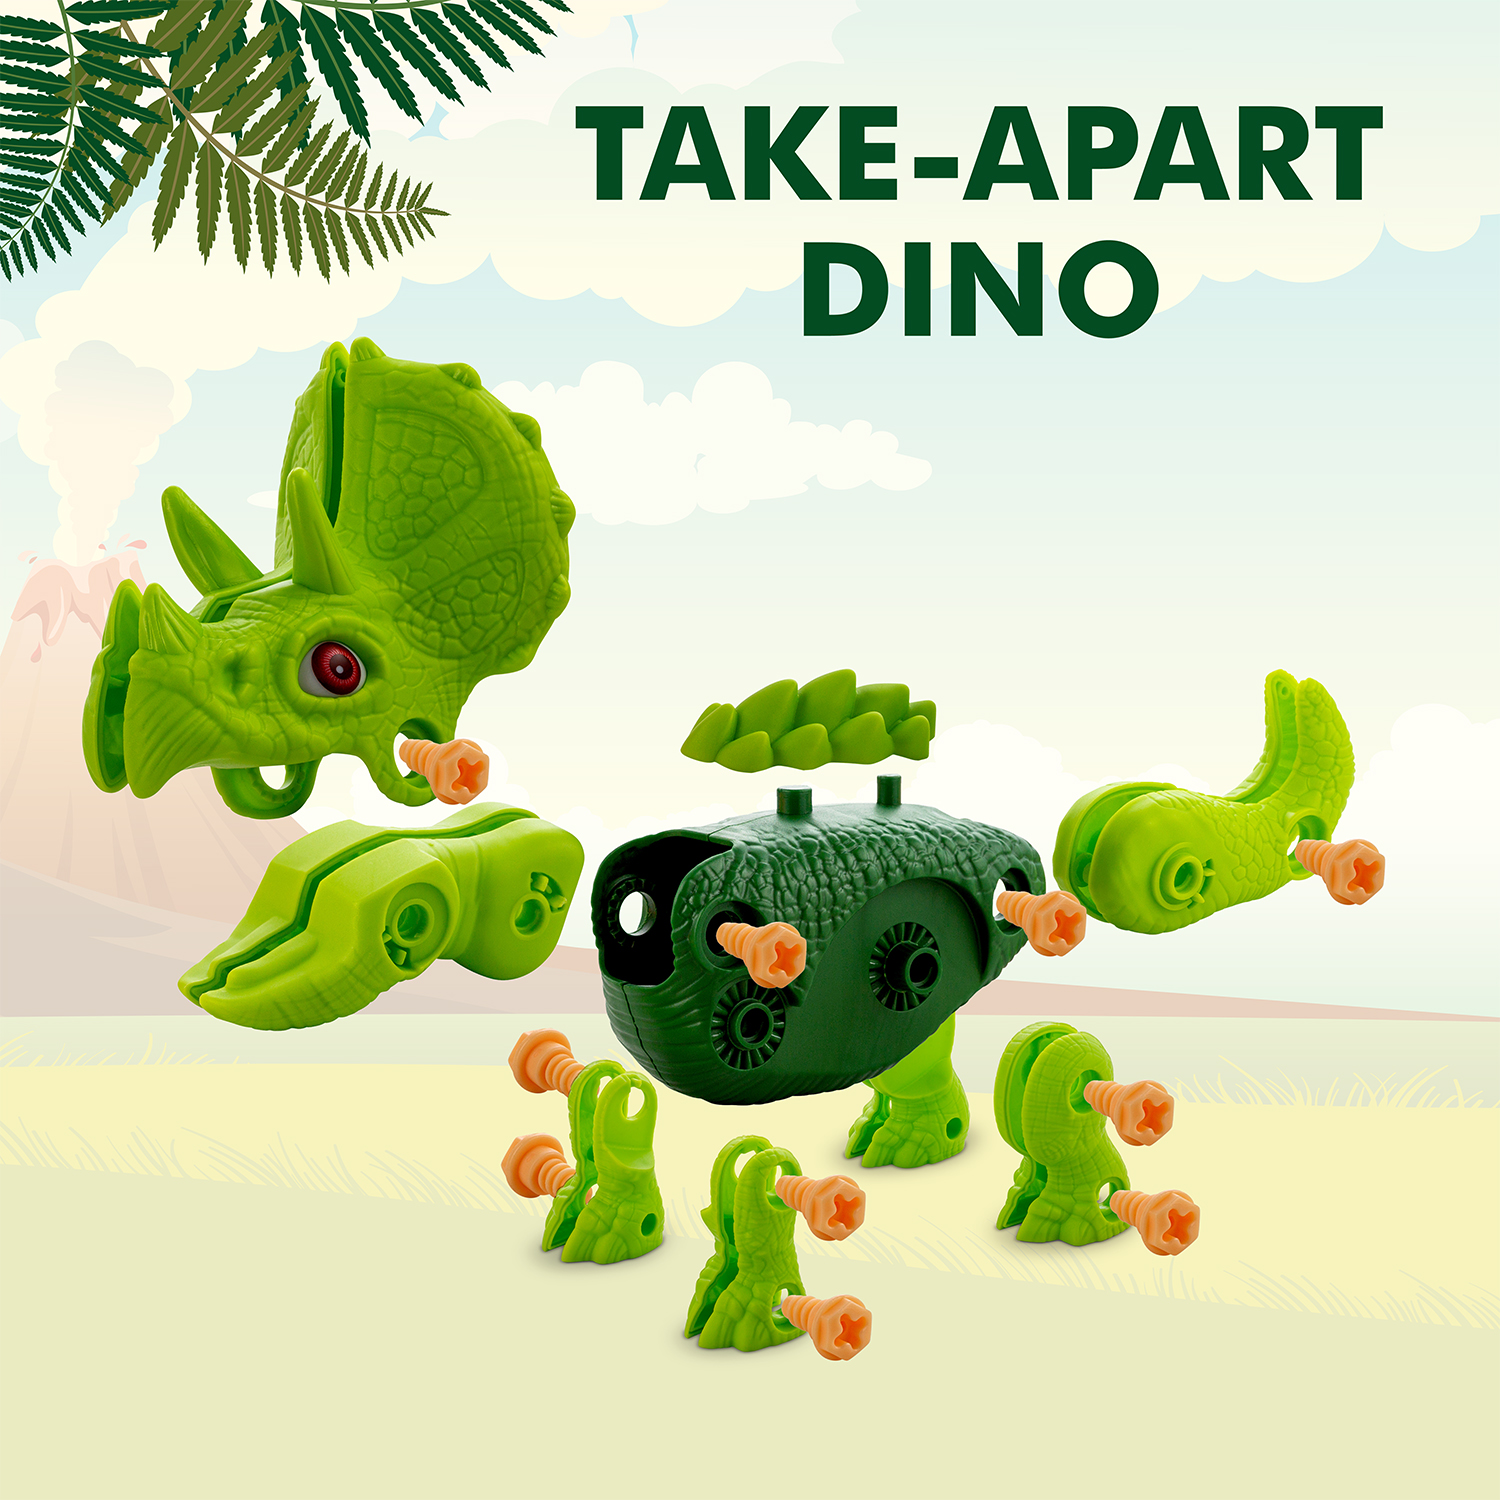 ToyVelt Dinosaur Take Apart Stem Toys for Boys & Girls Age 3 - 12 years old - Pack of 3 huge Dinosaurs, With Electric Drill, Dinosaur Toys Christmas Birthday Gifts Boys Girls - image 3 of 8